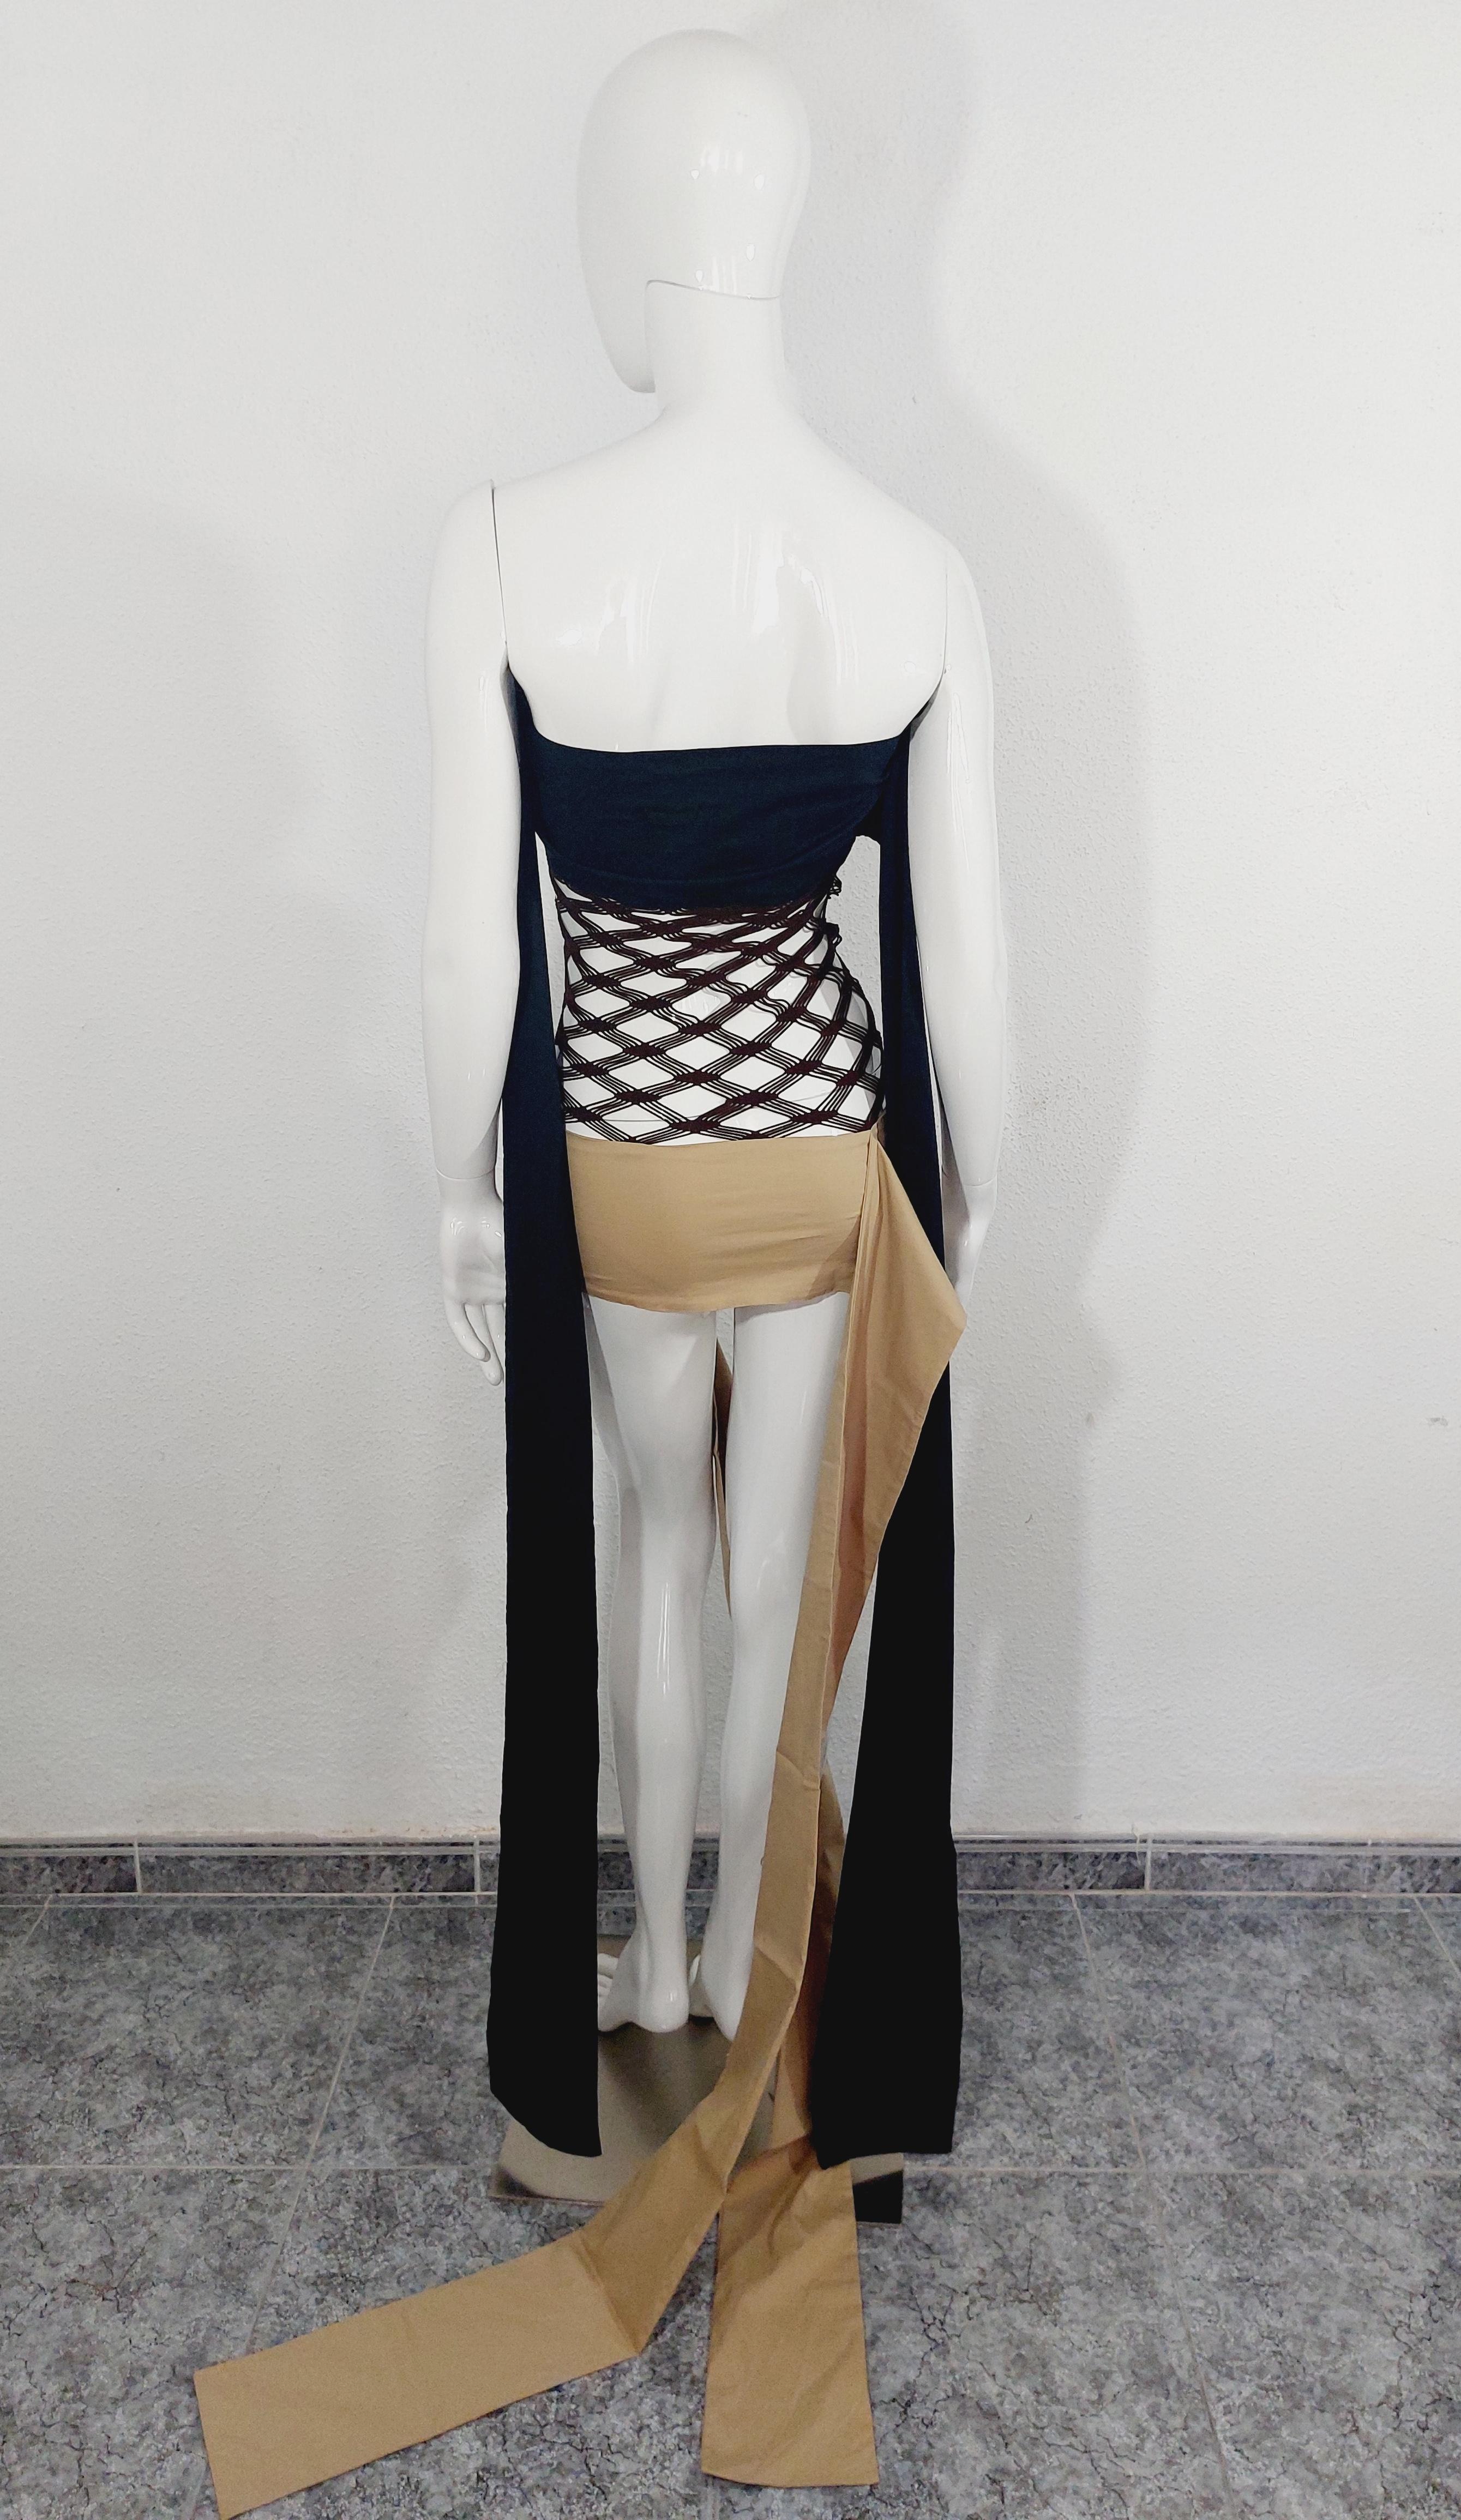 1990's Jean Paul Gaultier Black and Beige Strap With Net Panel Avantgarde Dress
Vintage Jean Paul Gaultier Dress. This striking dress by Jean Paul Gaultier dates back from the 1990’s. Of interesting design, it features black and beige body and brown